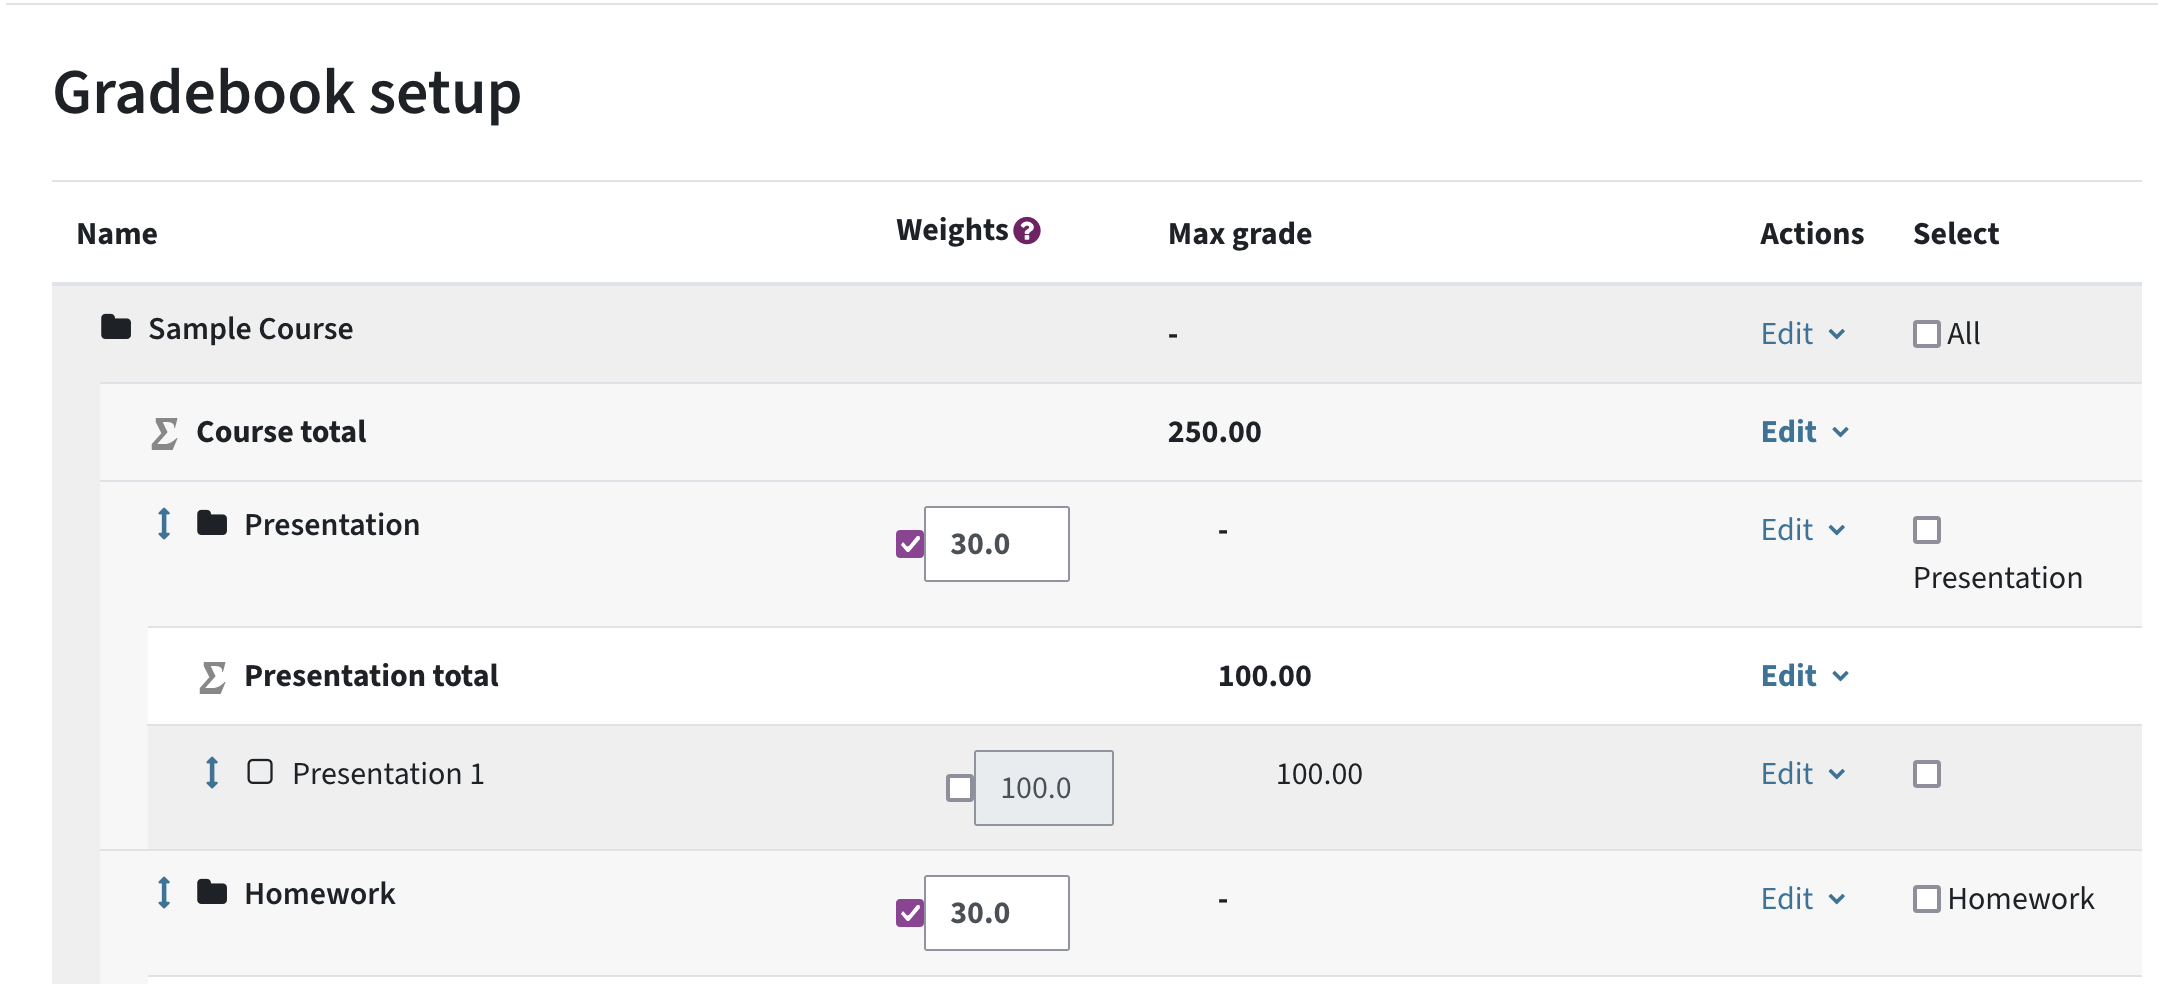 the gradebook setup of a course with several categories and items